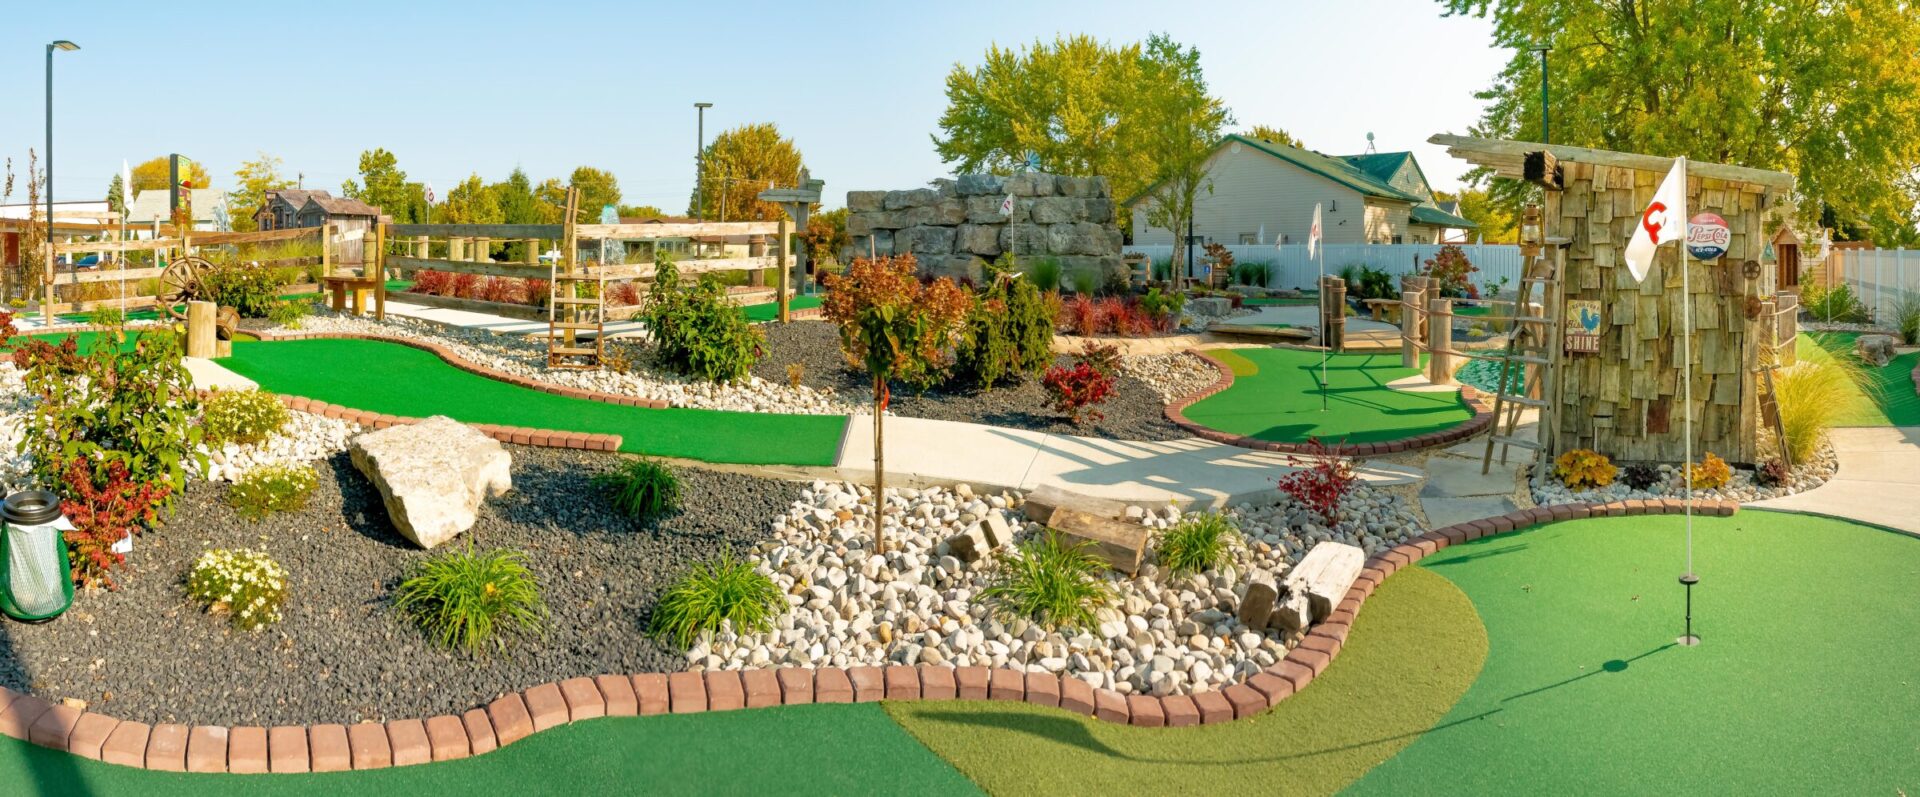 This panoramic image captures a vibrant outdoor miniature golf course with green turf, landscaping, rocks, wooden structures, and a clear blue sky overhead.